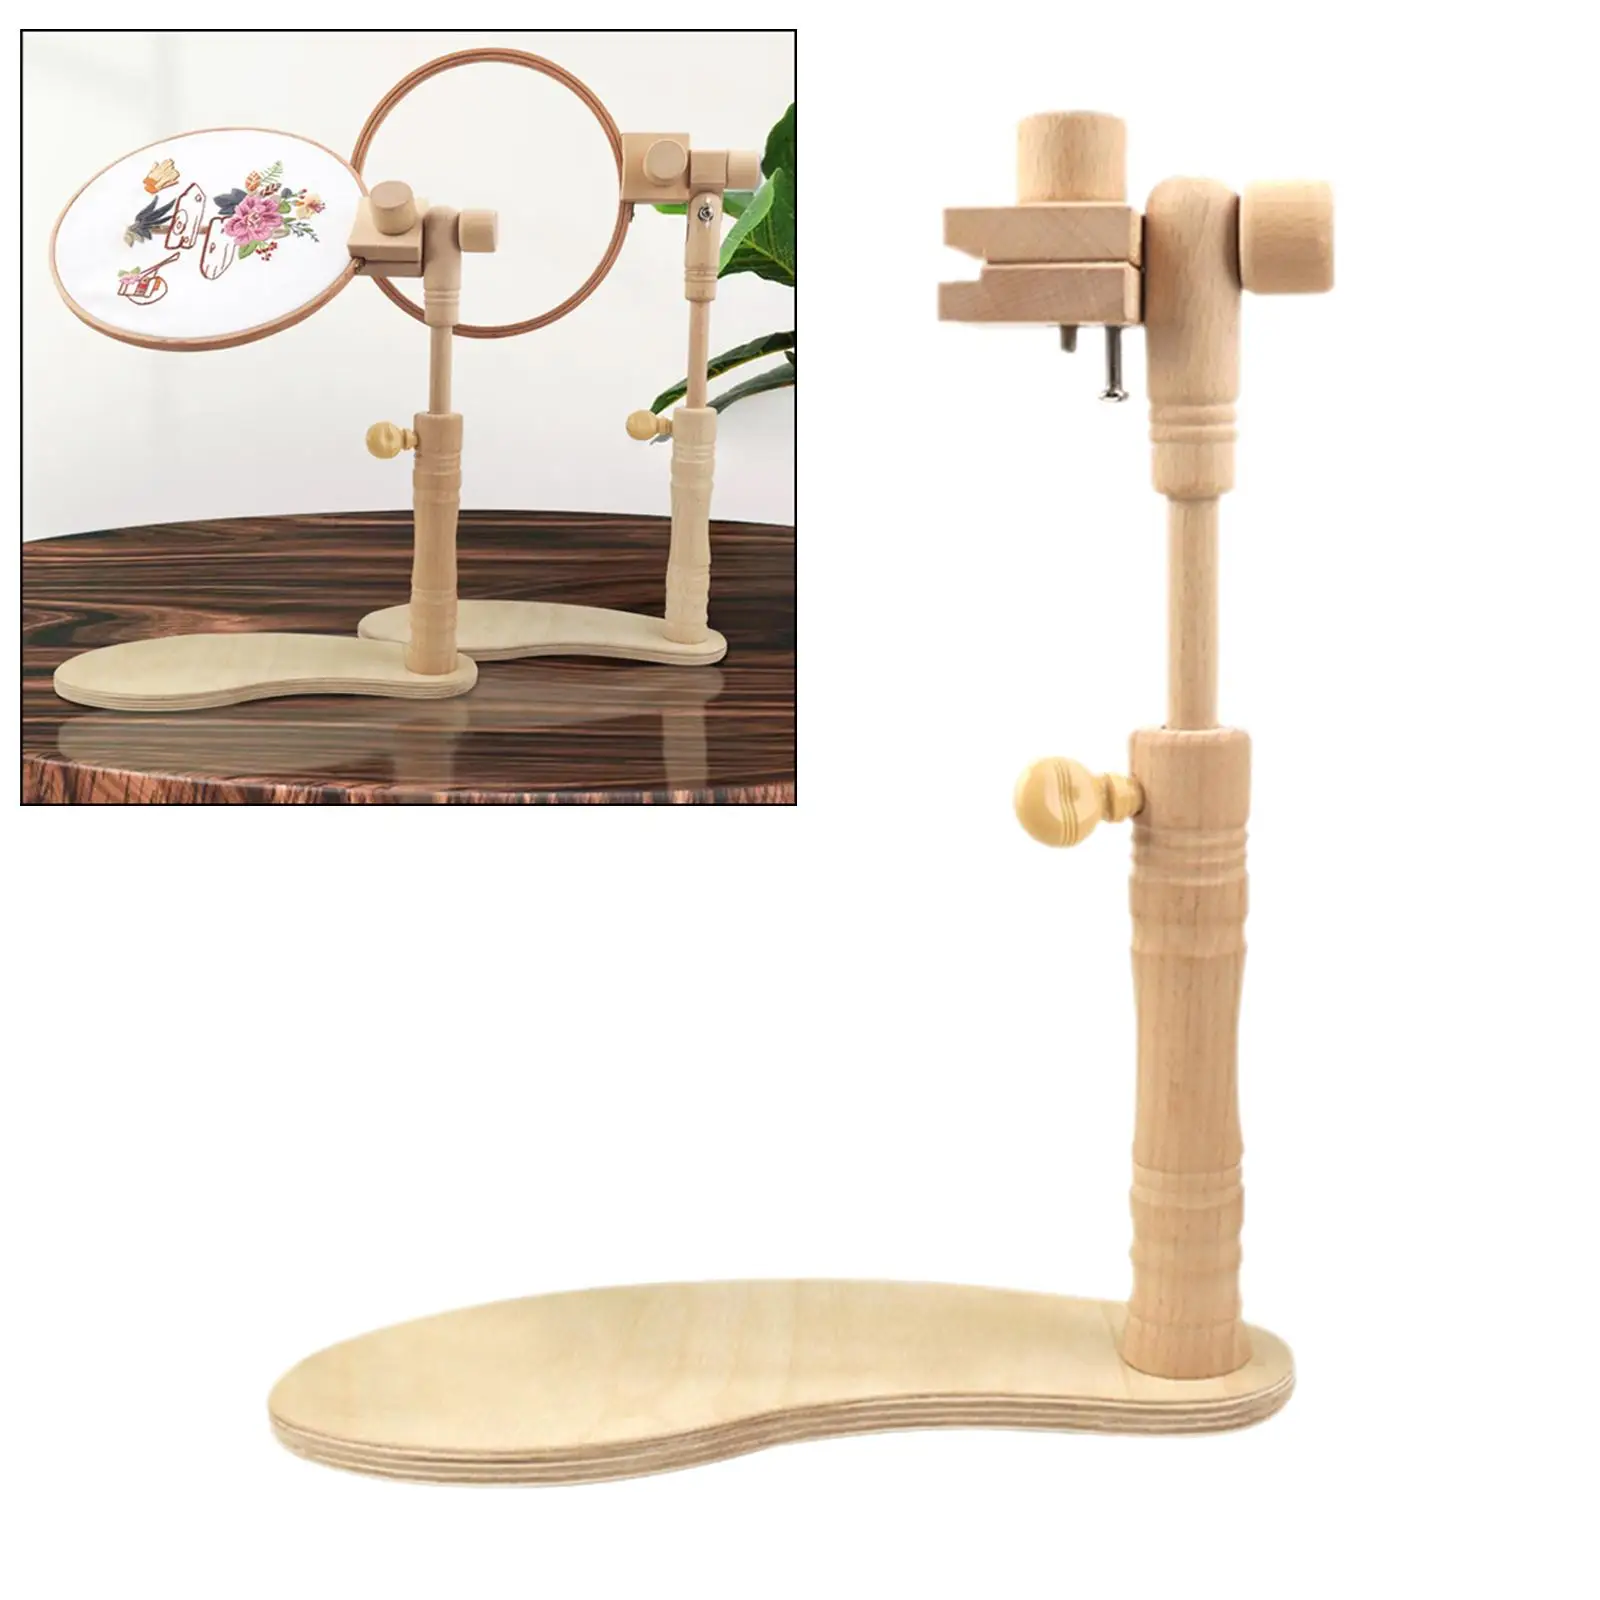 Embroidery Lap Stand Wood Cross Stitch Rack Hoop Holder Needlework Tools